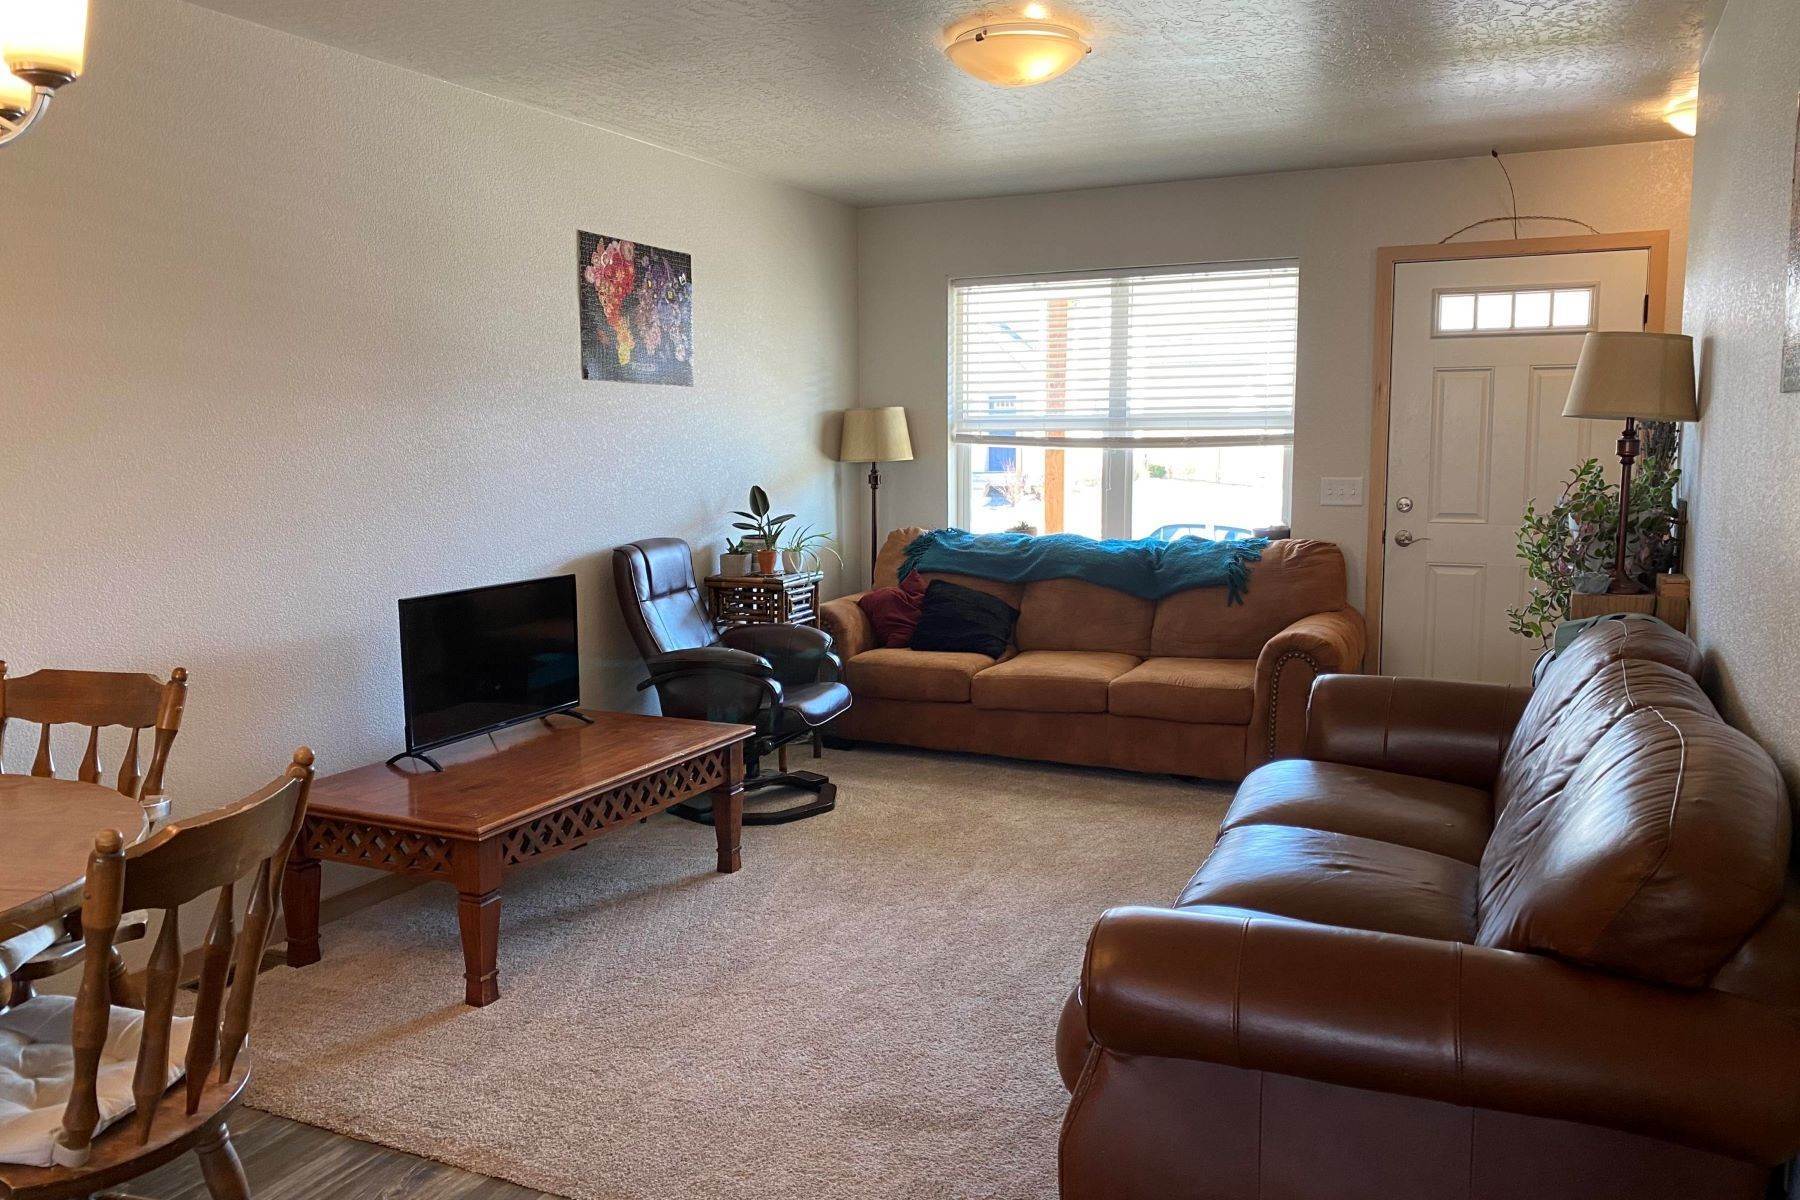 4. townhouses for Sale at Scott Street Village Townhome 1865 B Shakespeare Street Missoula, Montana 59802 United States